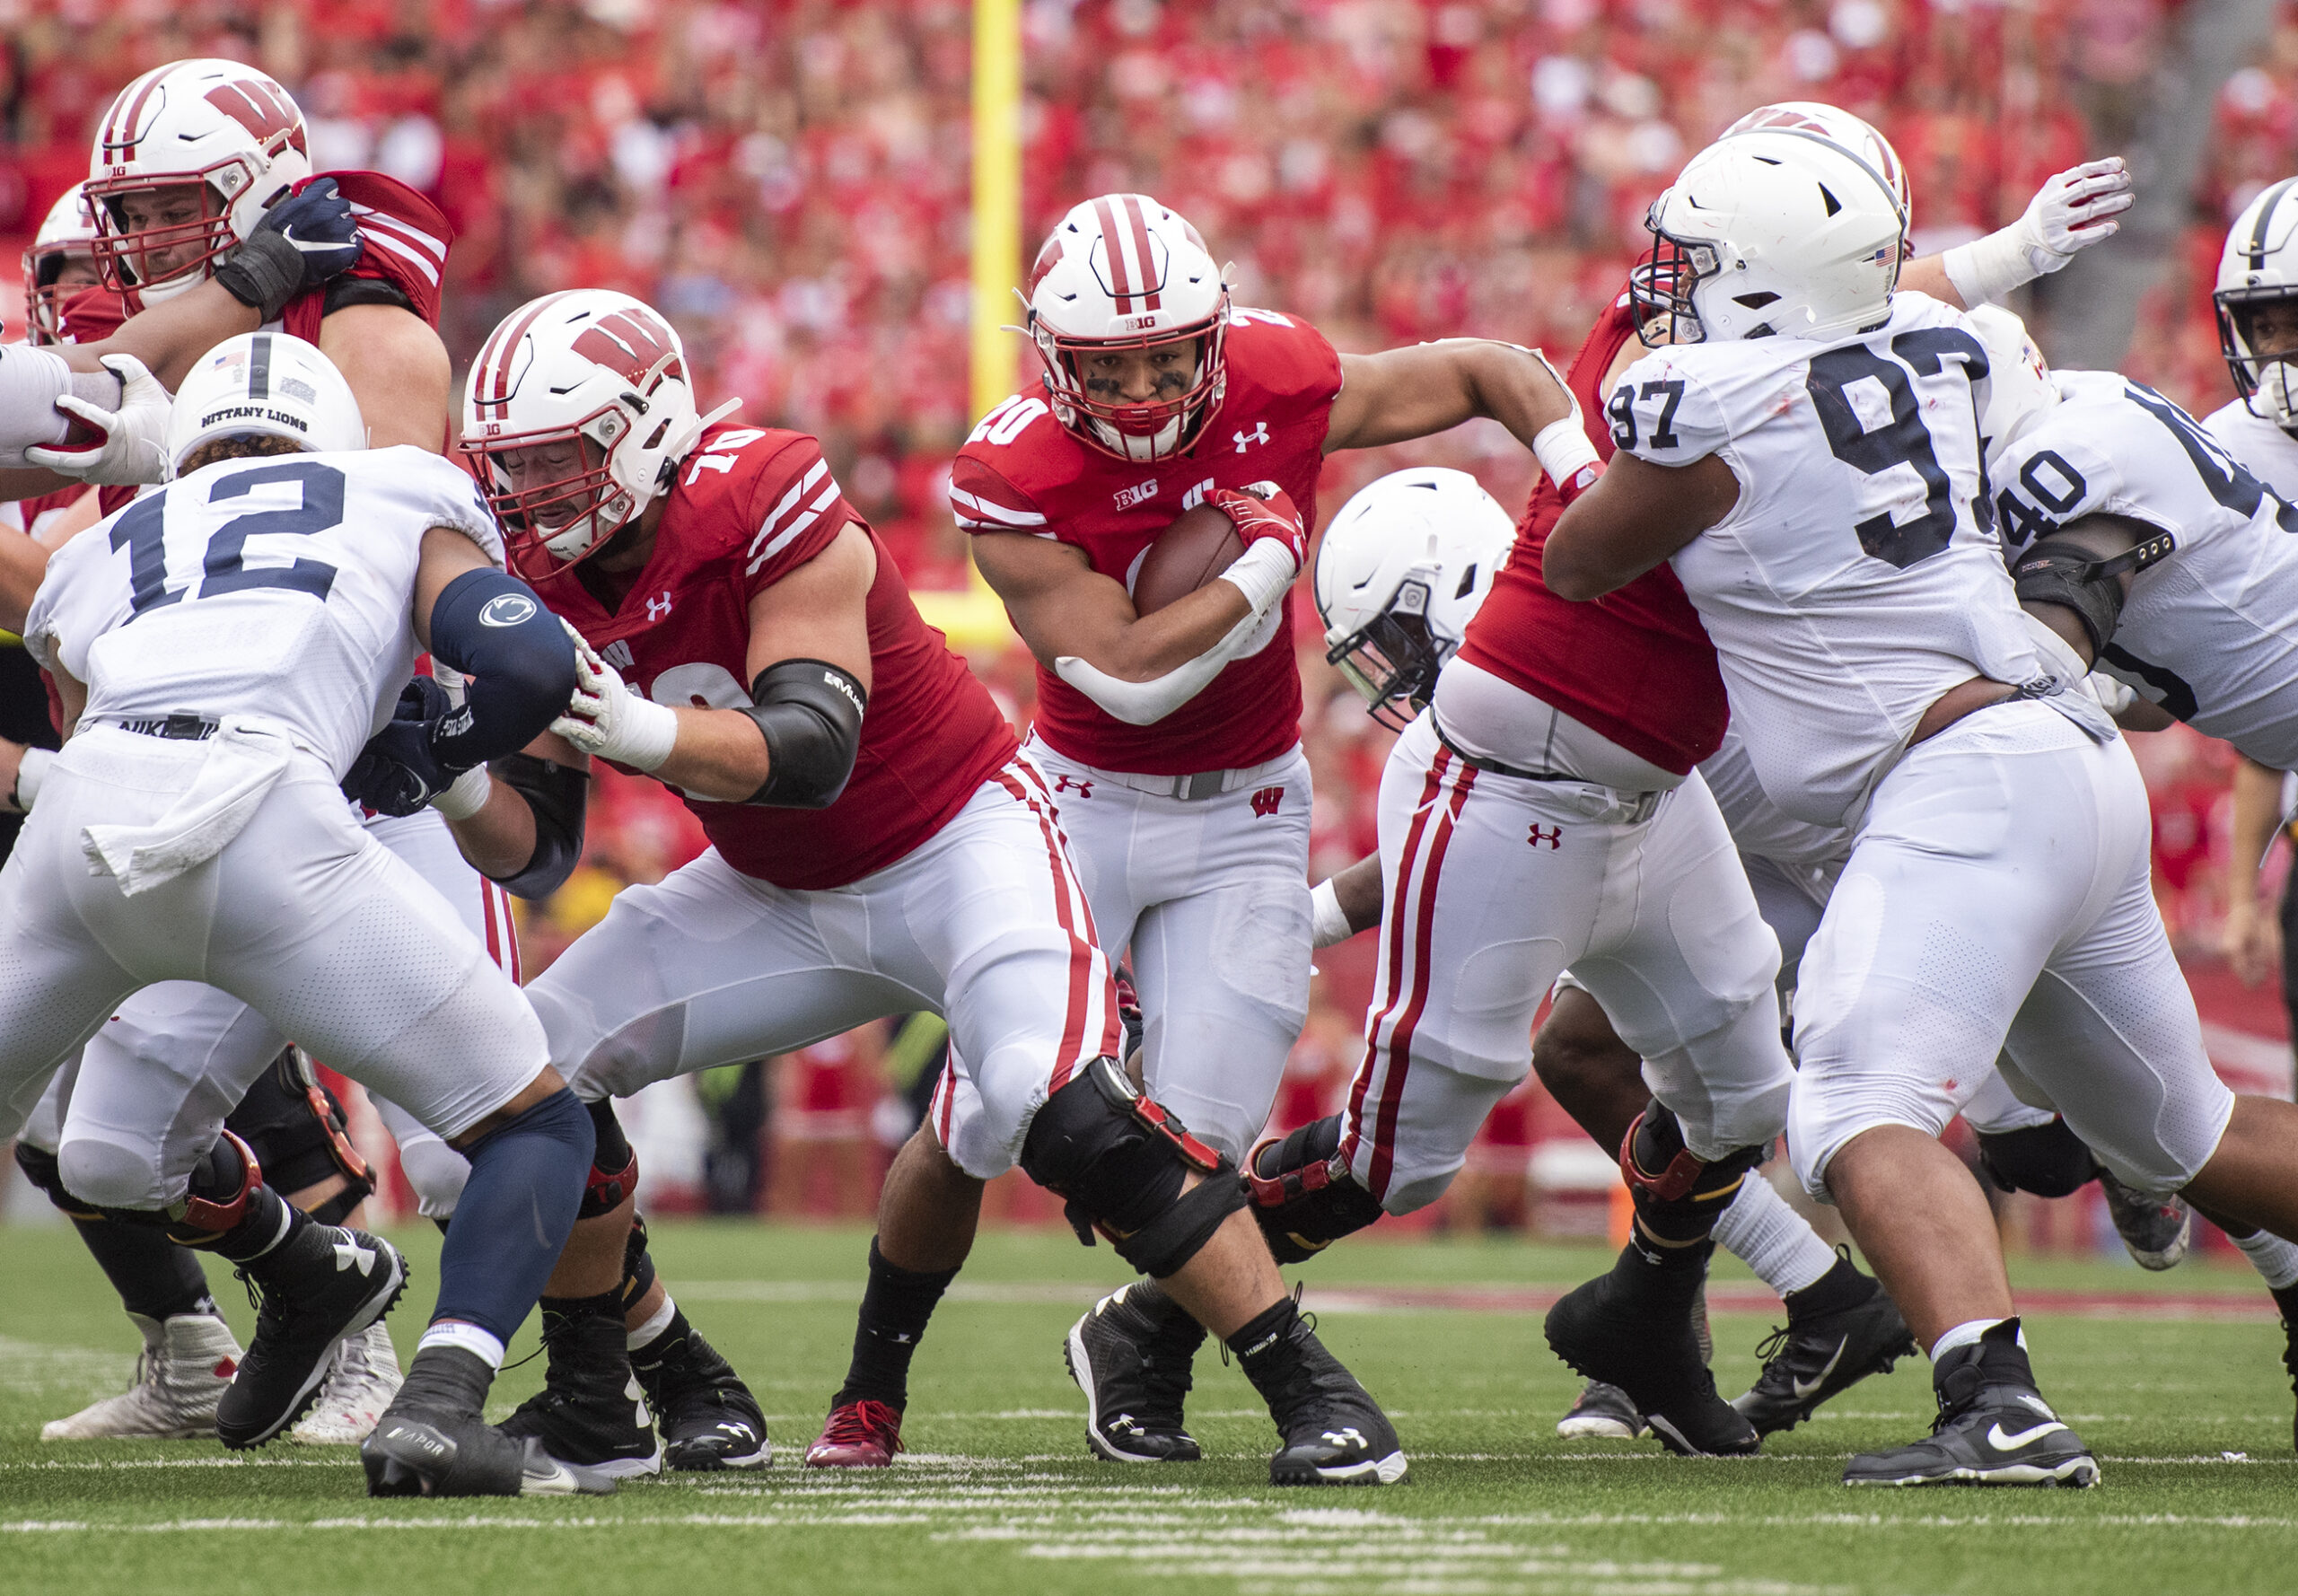 A Wisconsin player can be seen holding the ball securely and rushing through a hole in the Penn State defense.